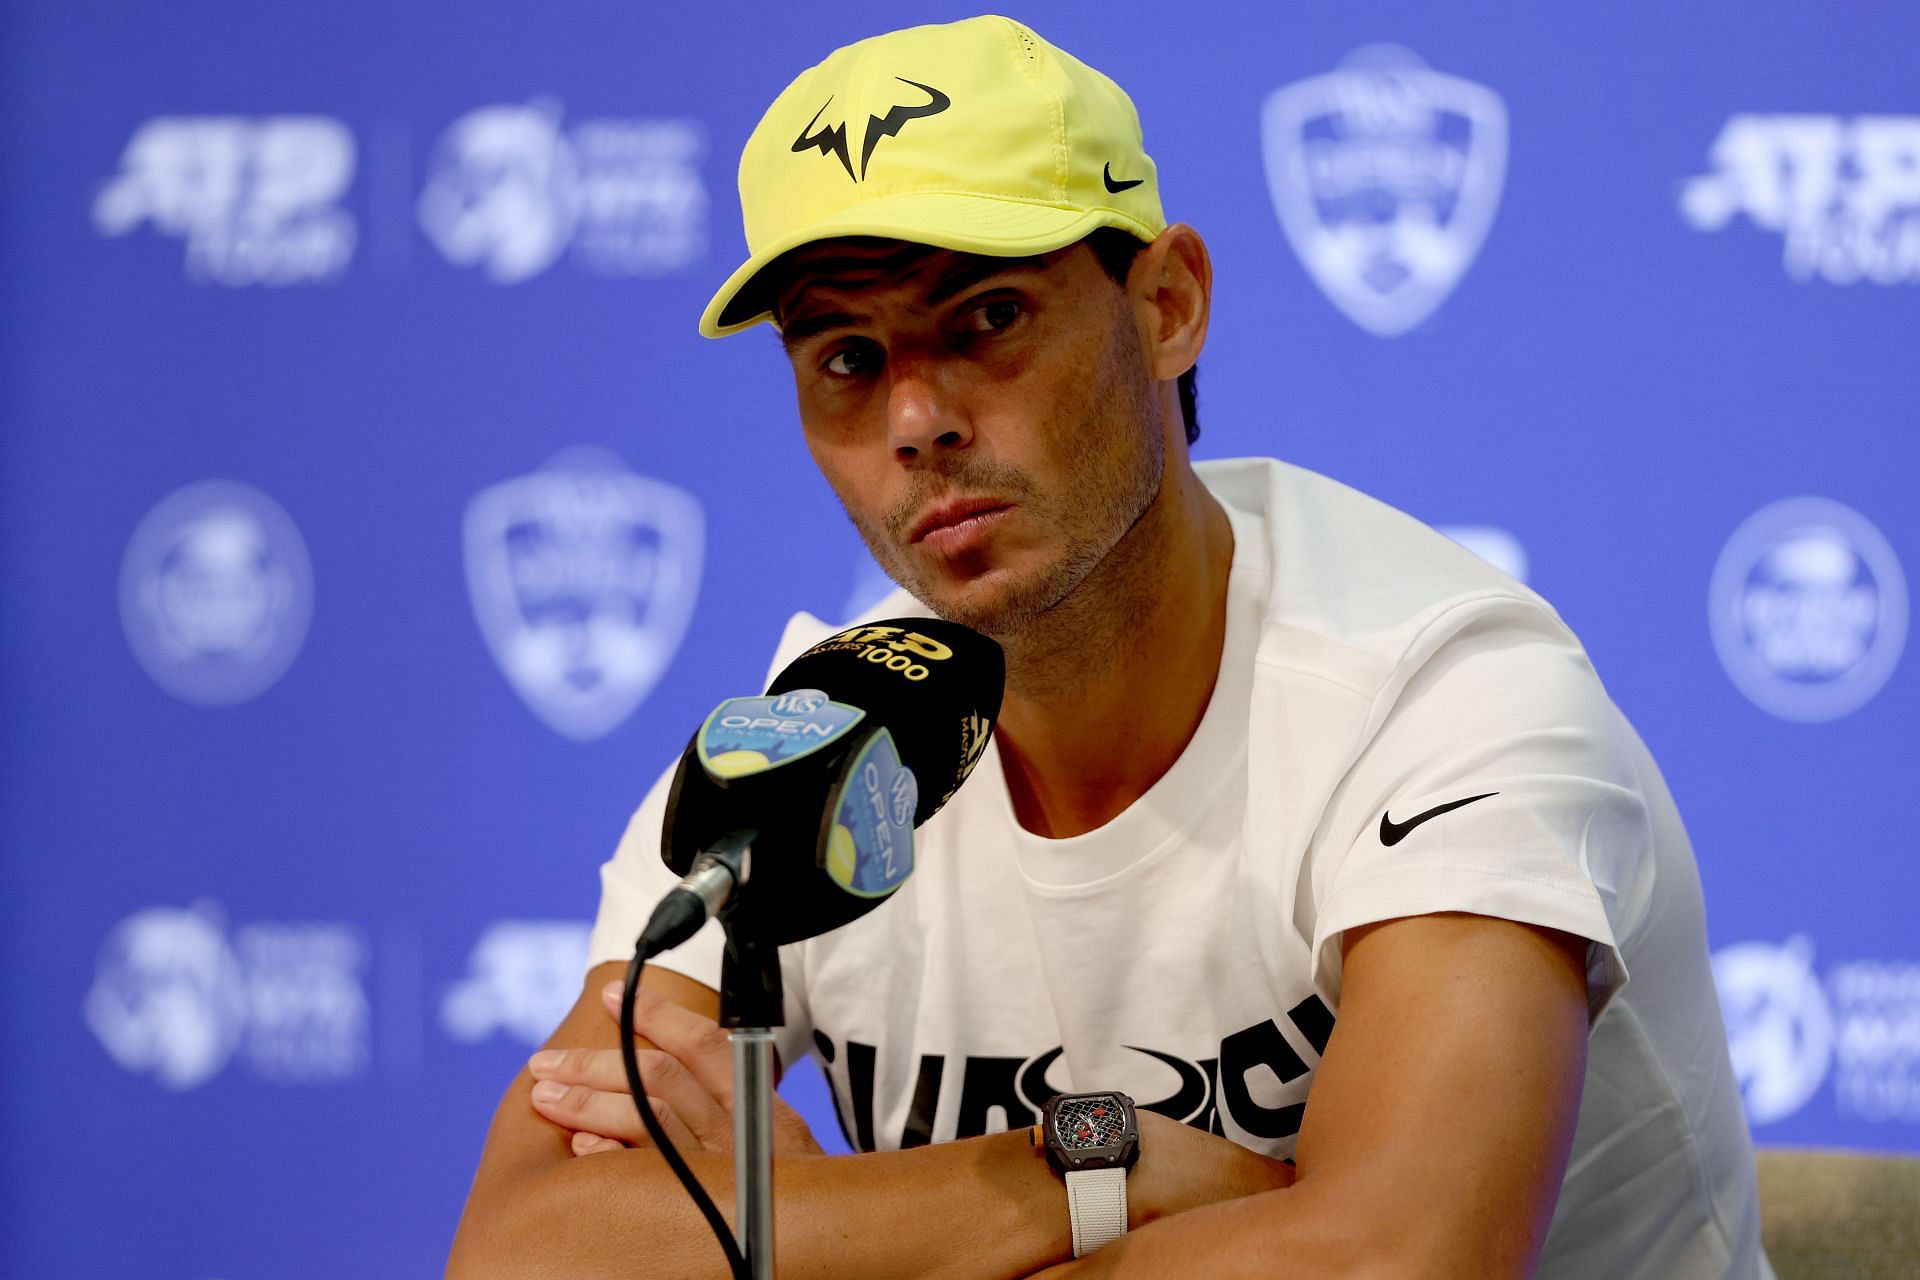 Rafael Nadal at the Western &amp; Southern Open